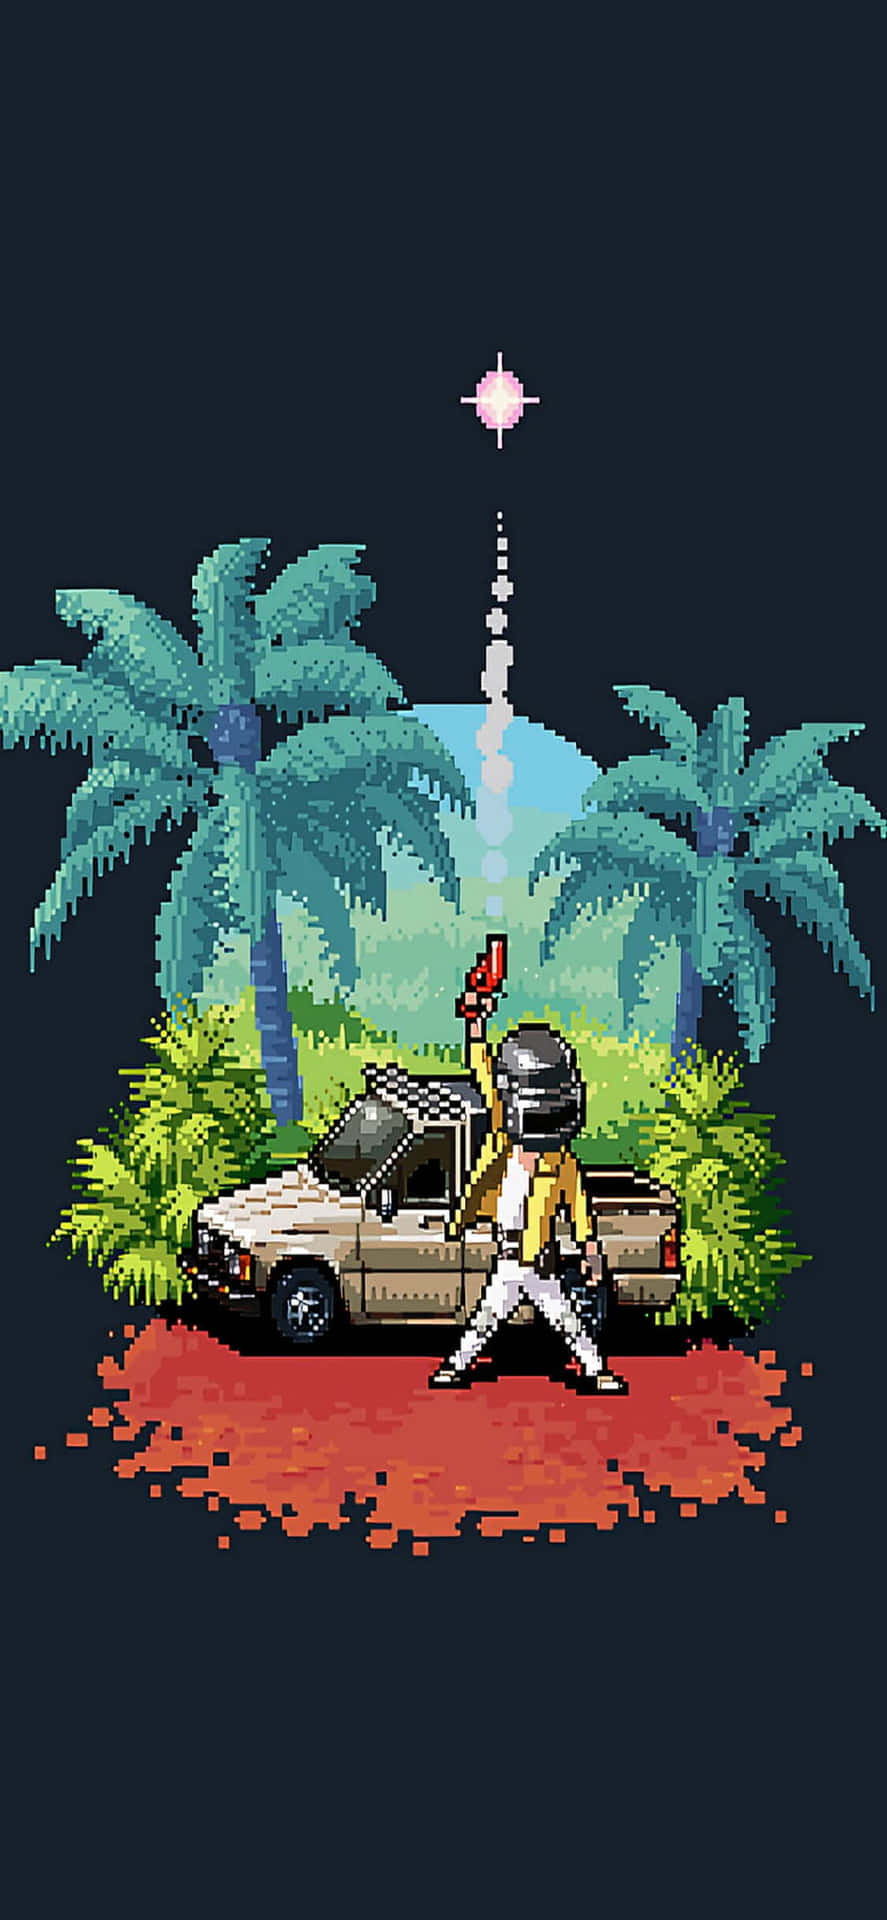 a pixelated image of a man standing in front of a car